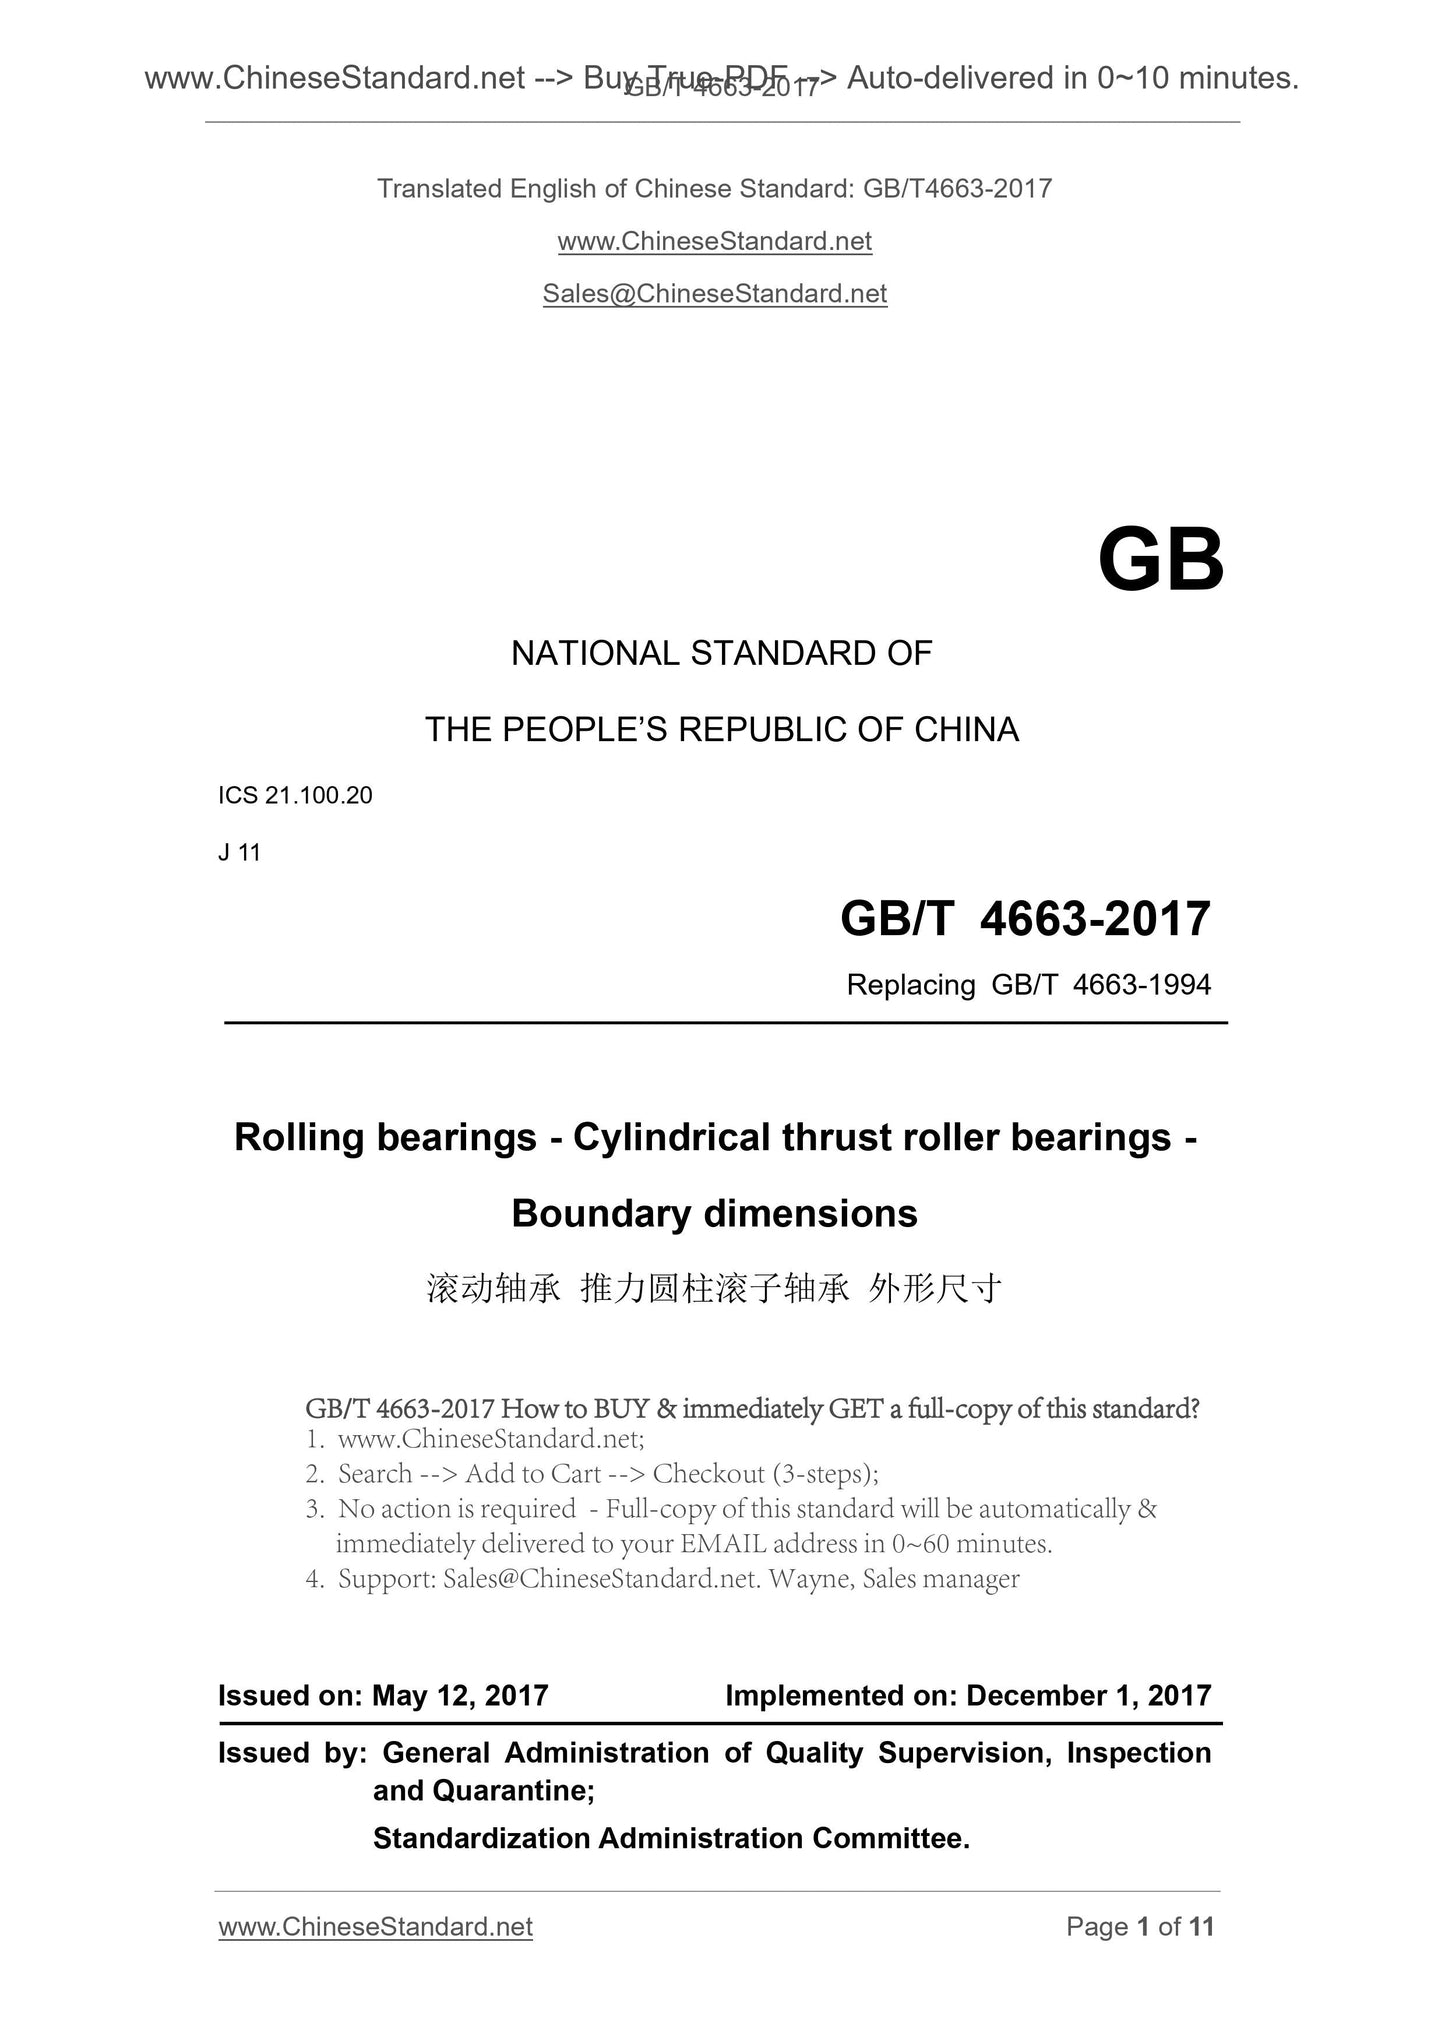 GB/T 4663-2017 Page 1